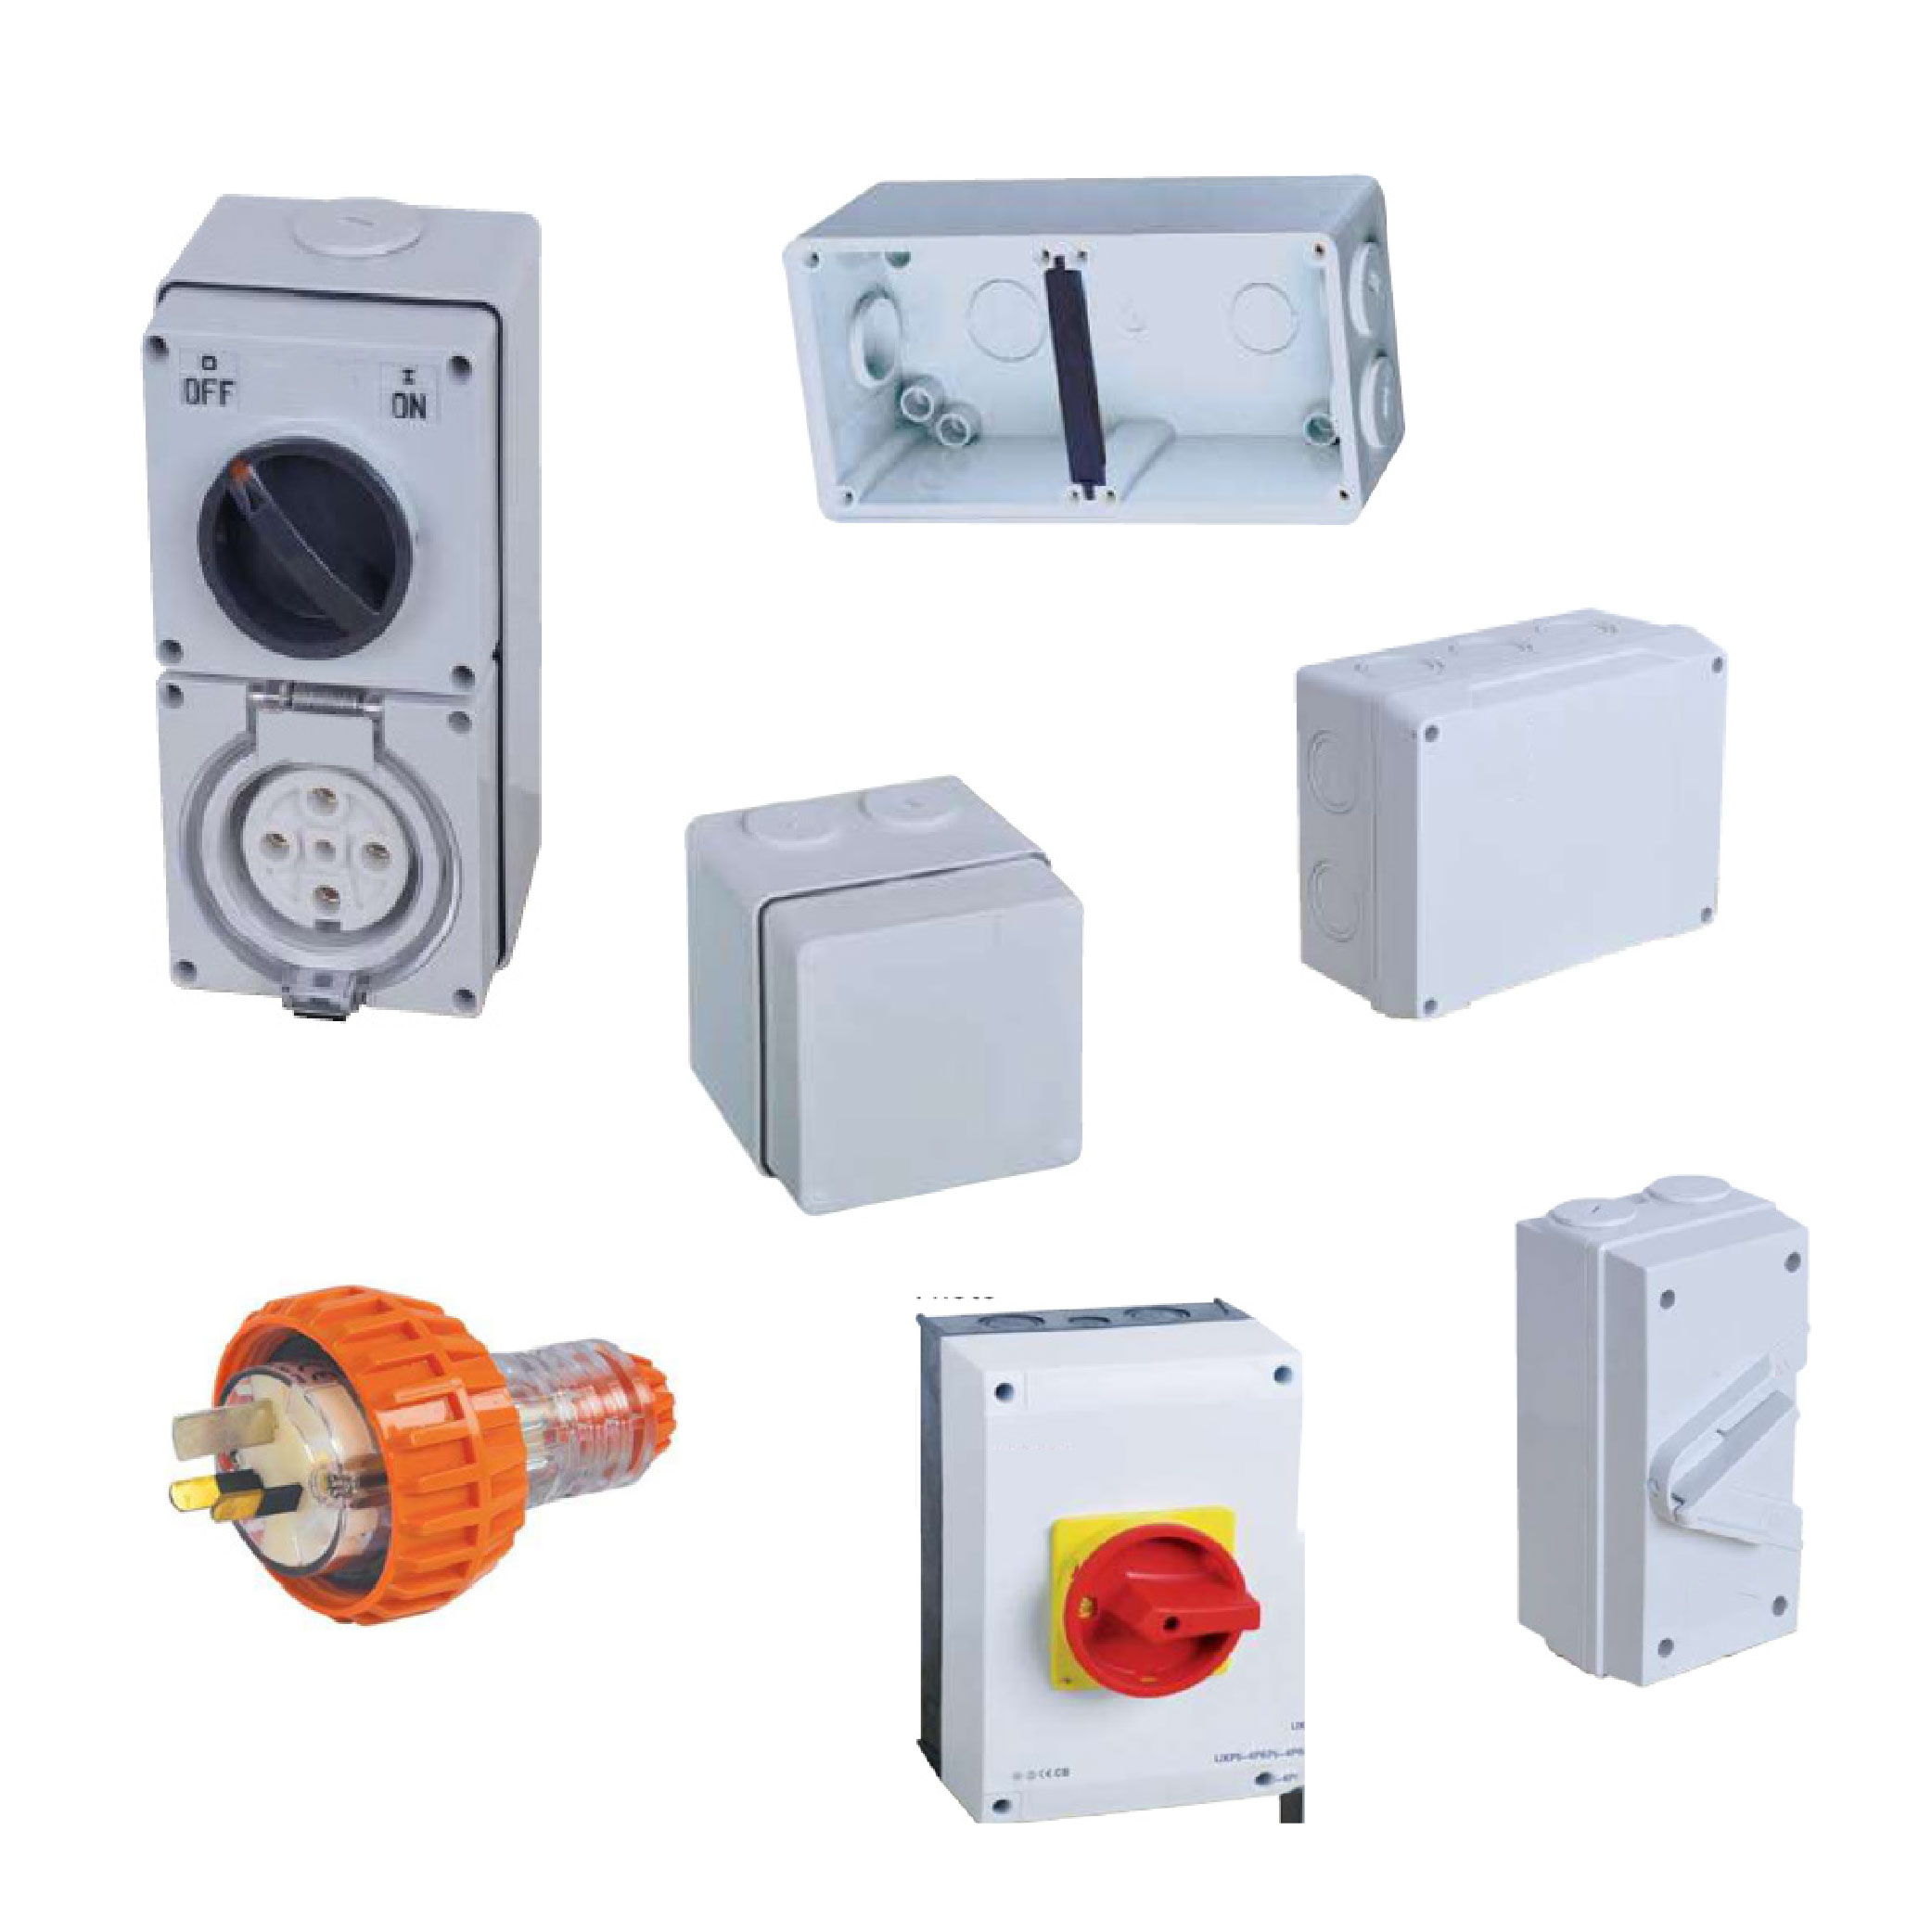 IP66 Plugs, Sockets, Switches & Junction Boxes